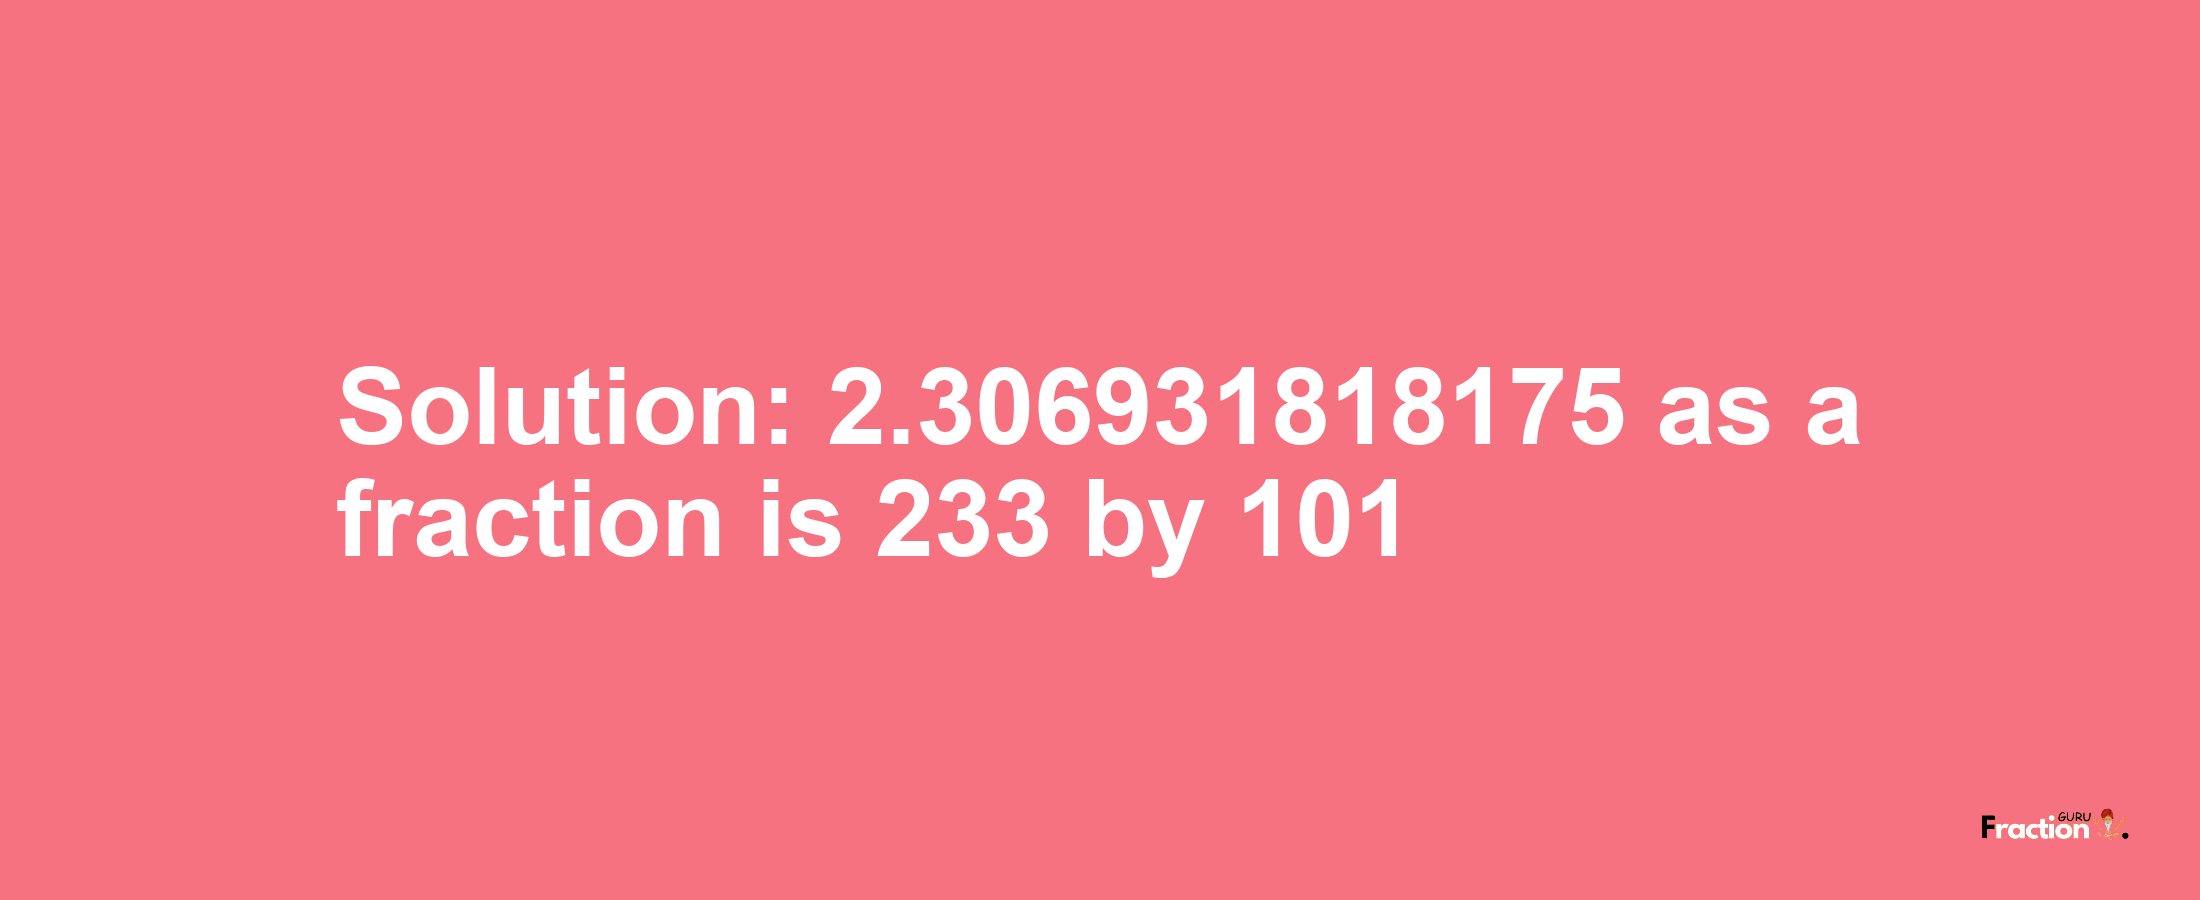 Solution:2.306931818175 as a fraction is 233/101